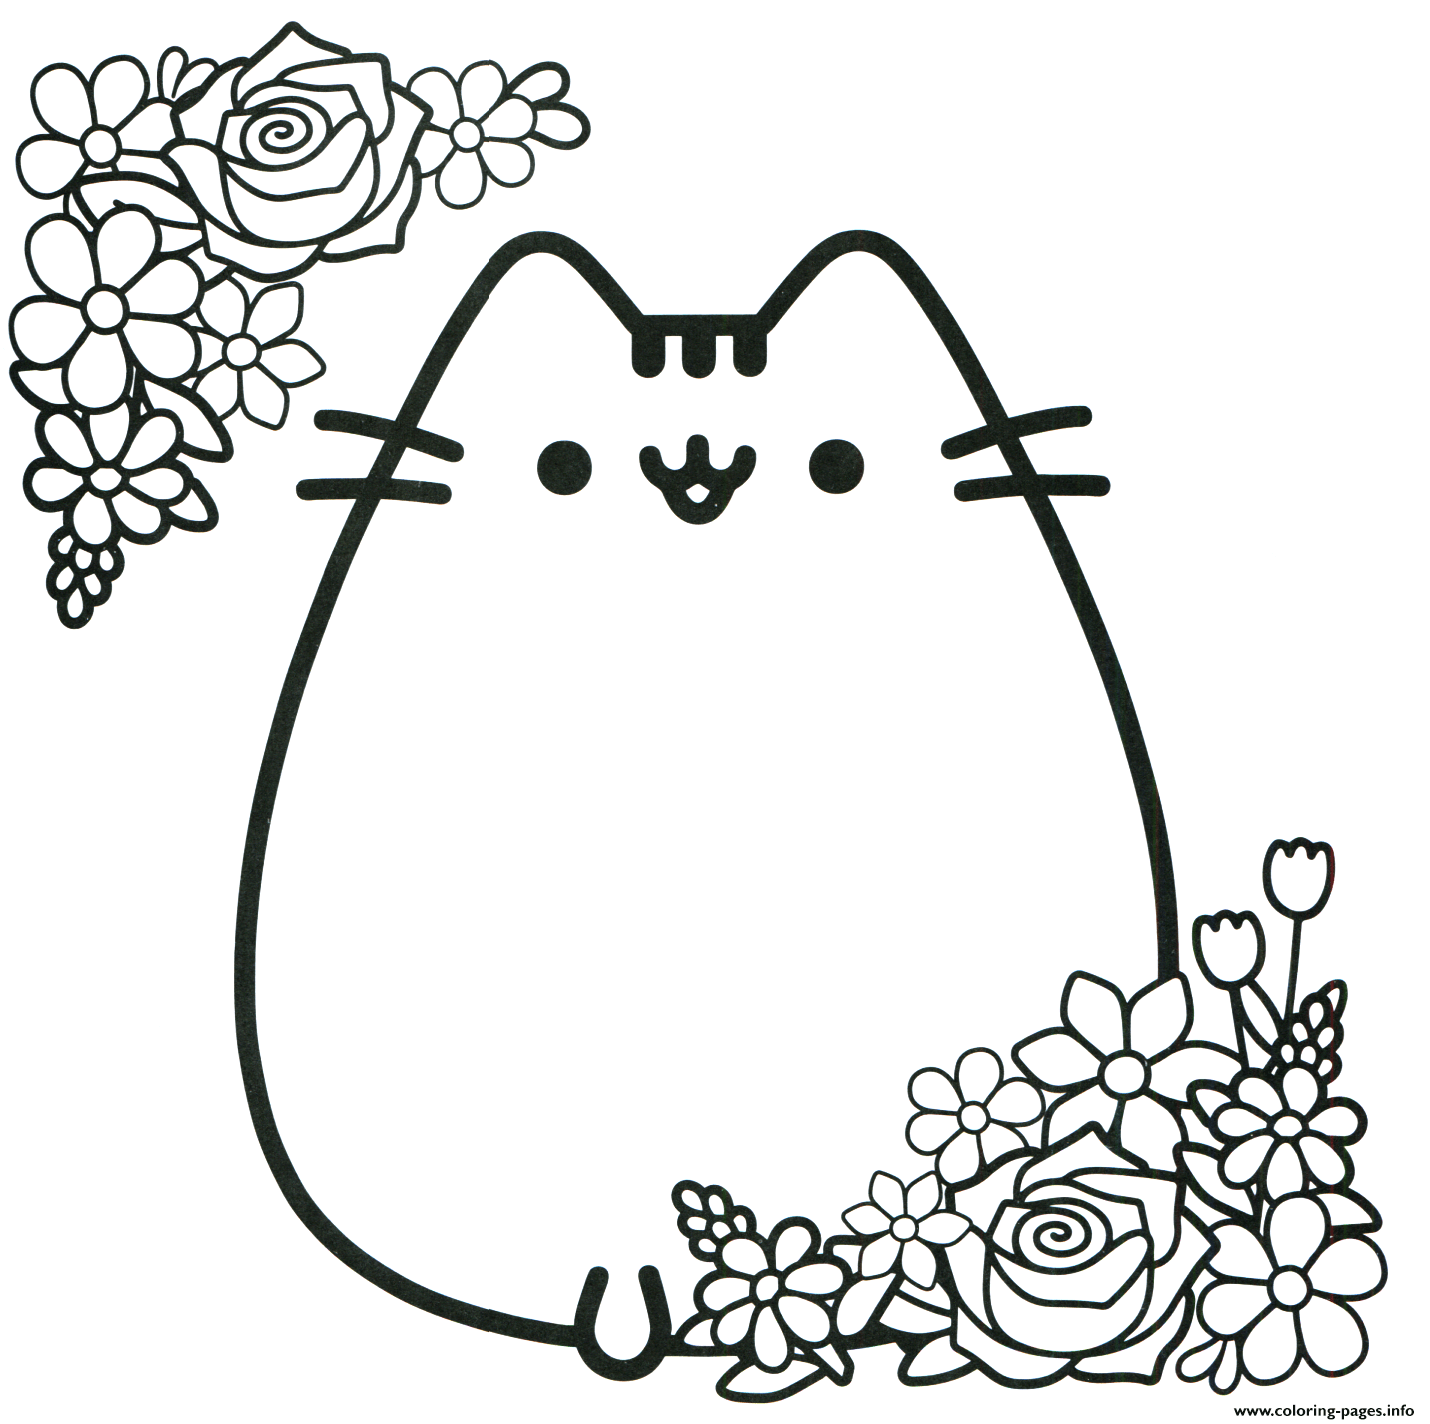 Remarkable Pusheen Pdf Photo Coloring Page